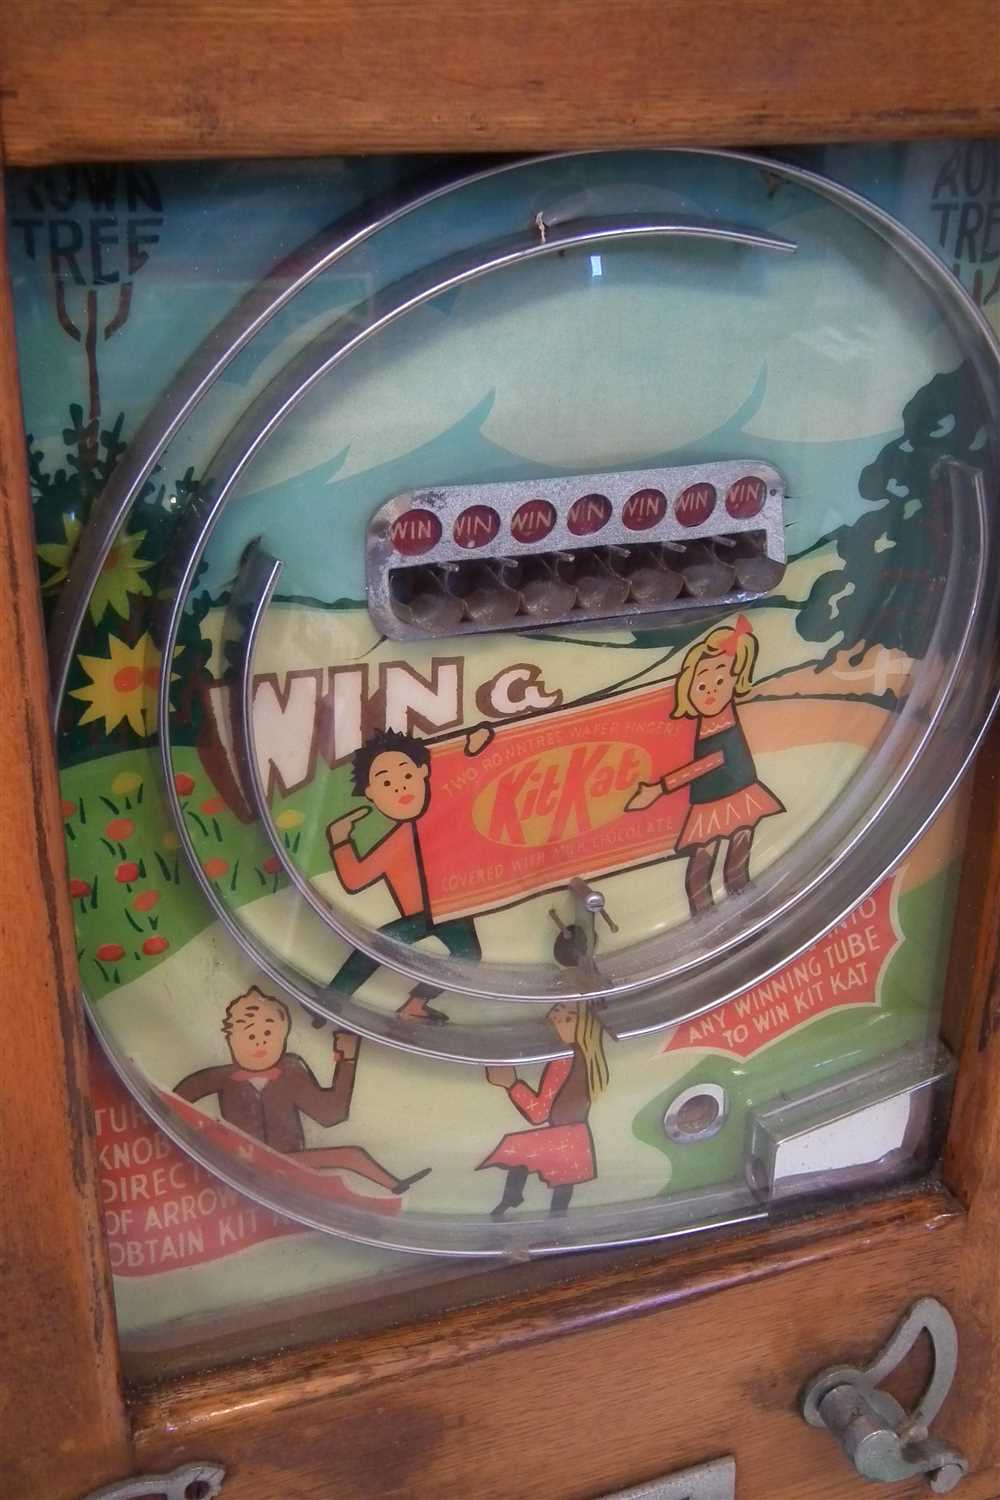 allwin penny slot machines for sale